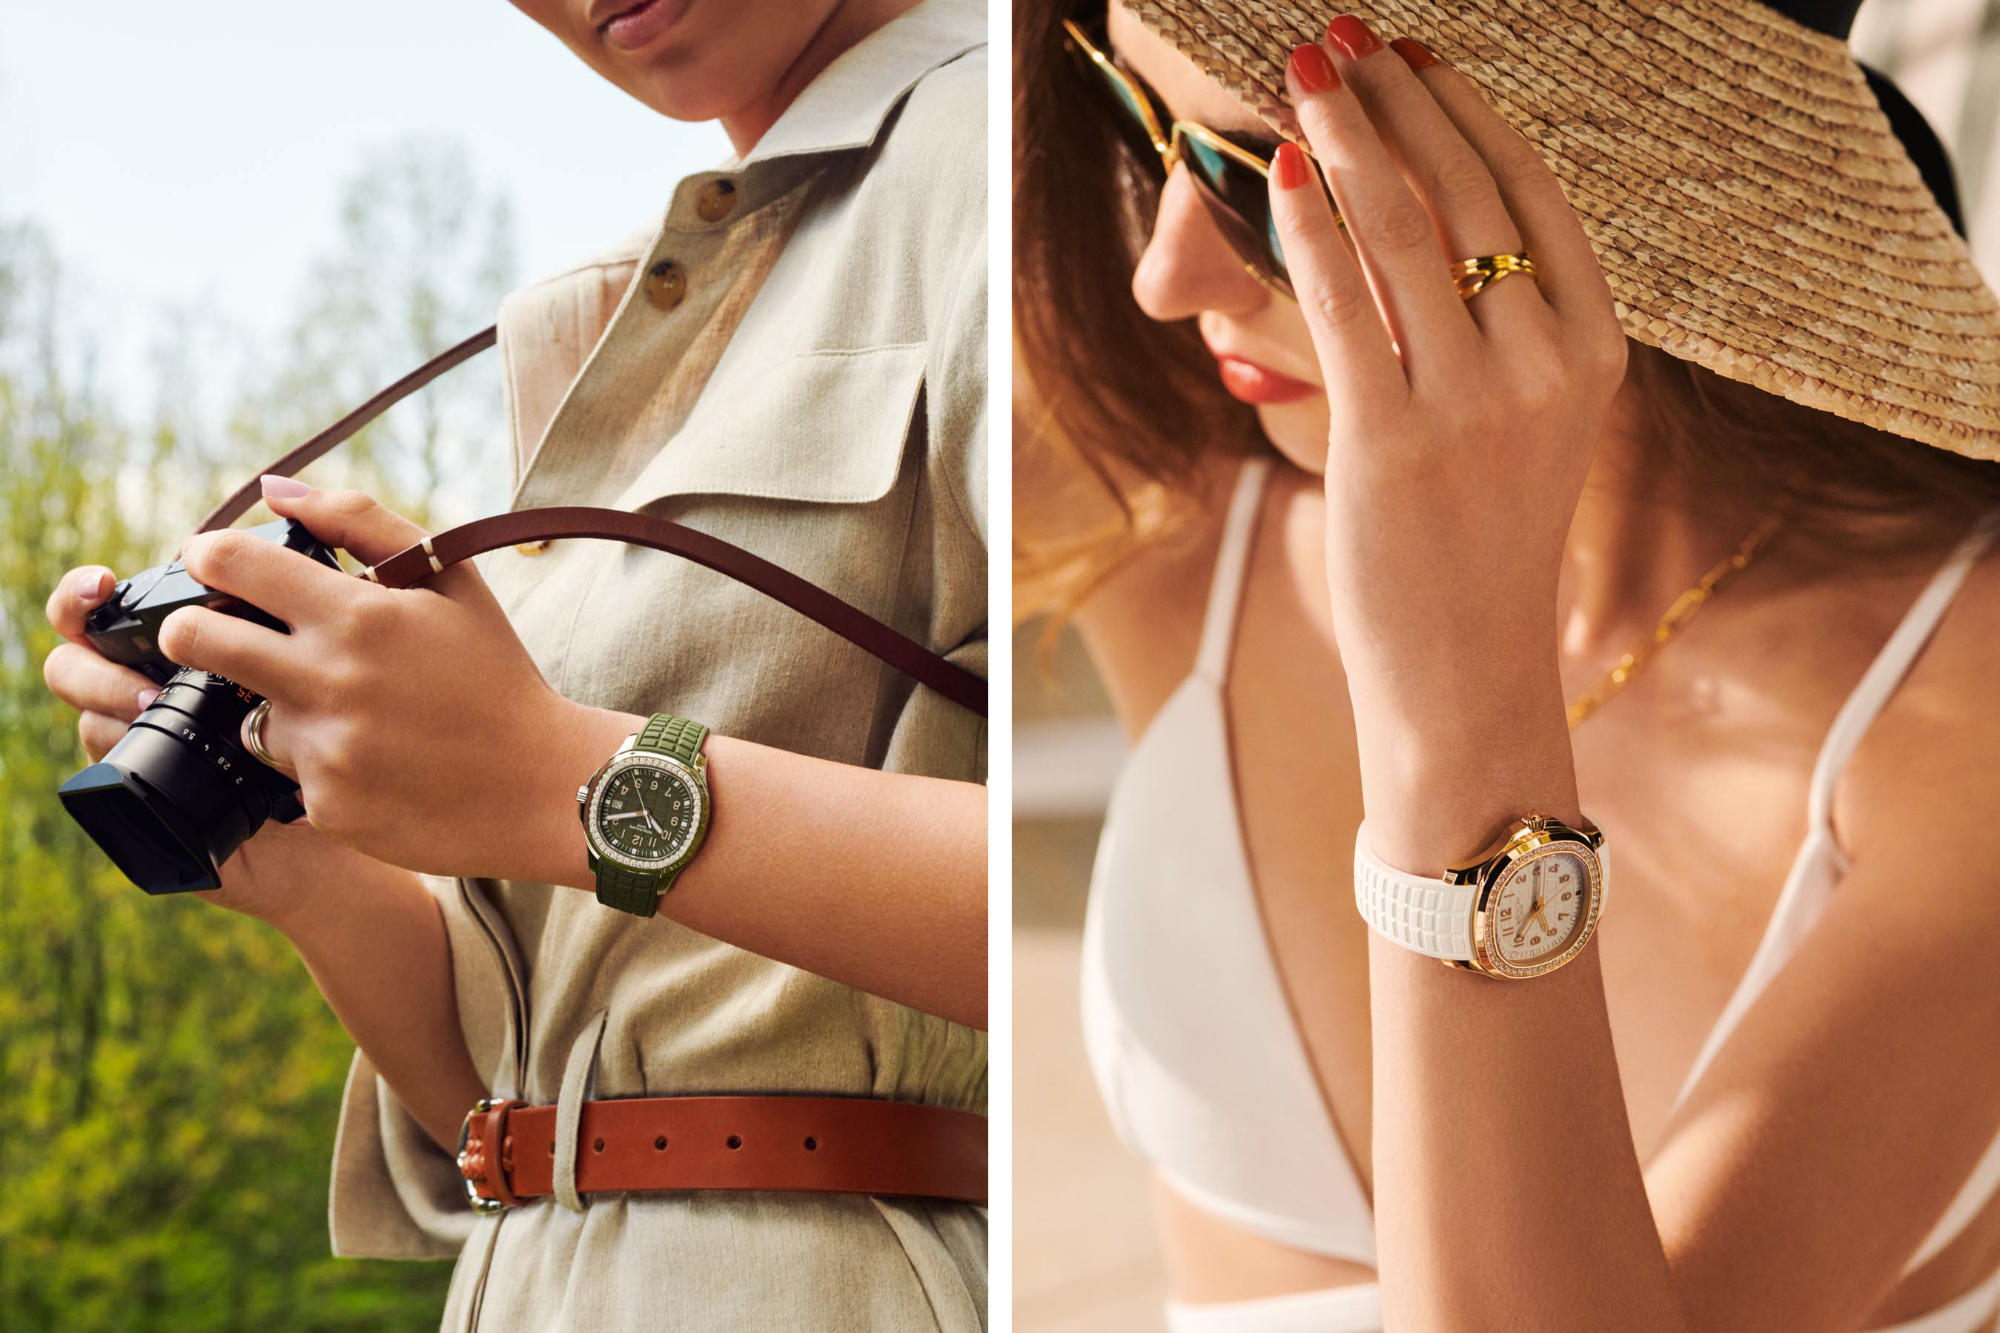 In 2021, Patek Philippe’s new Aquanaut Luce collection caters to a new generation of contemporary active women